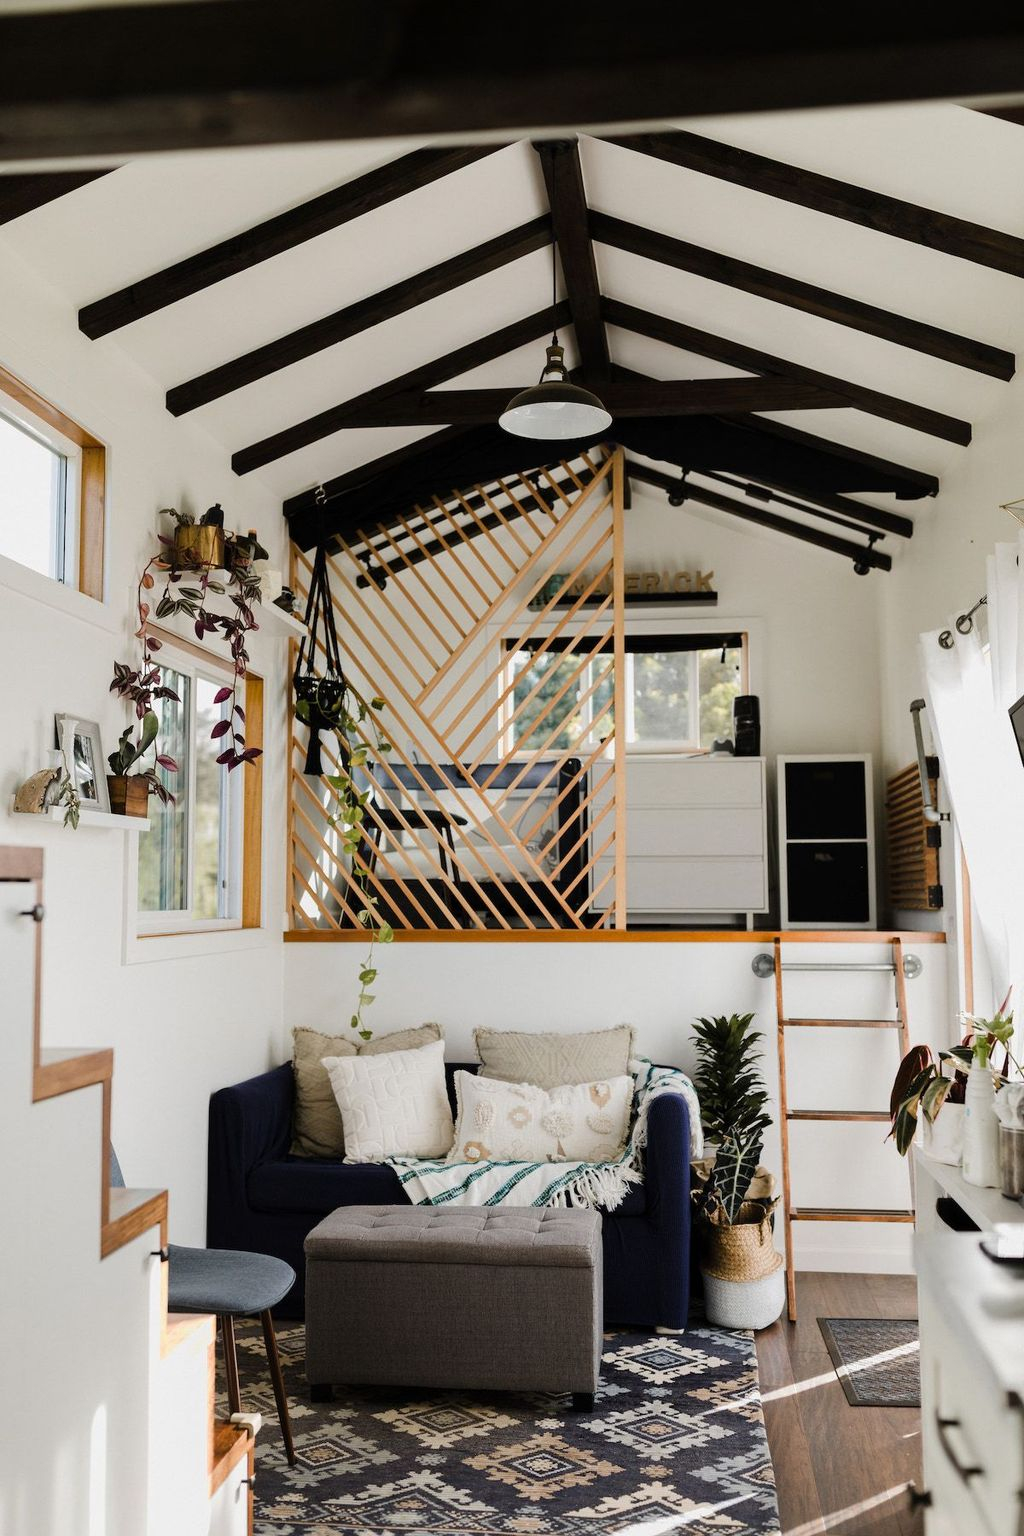 Cute Tiny Home Designs You Must See To Believe38